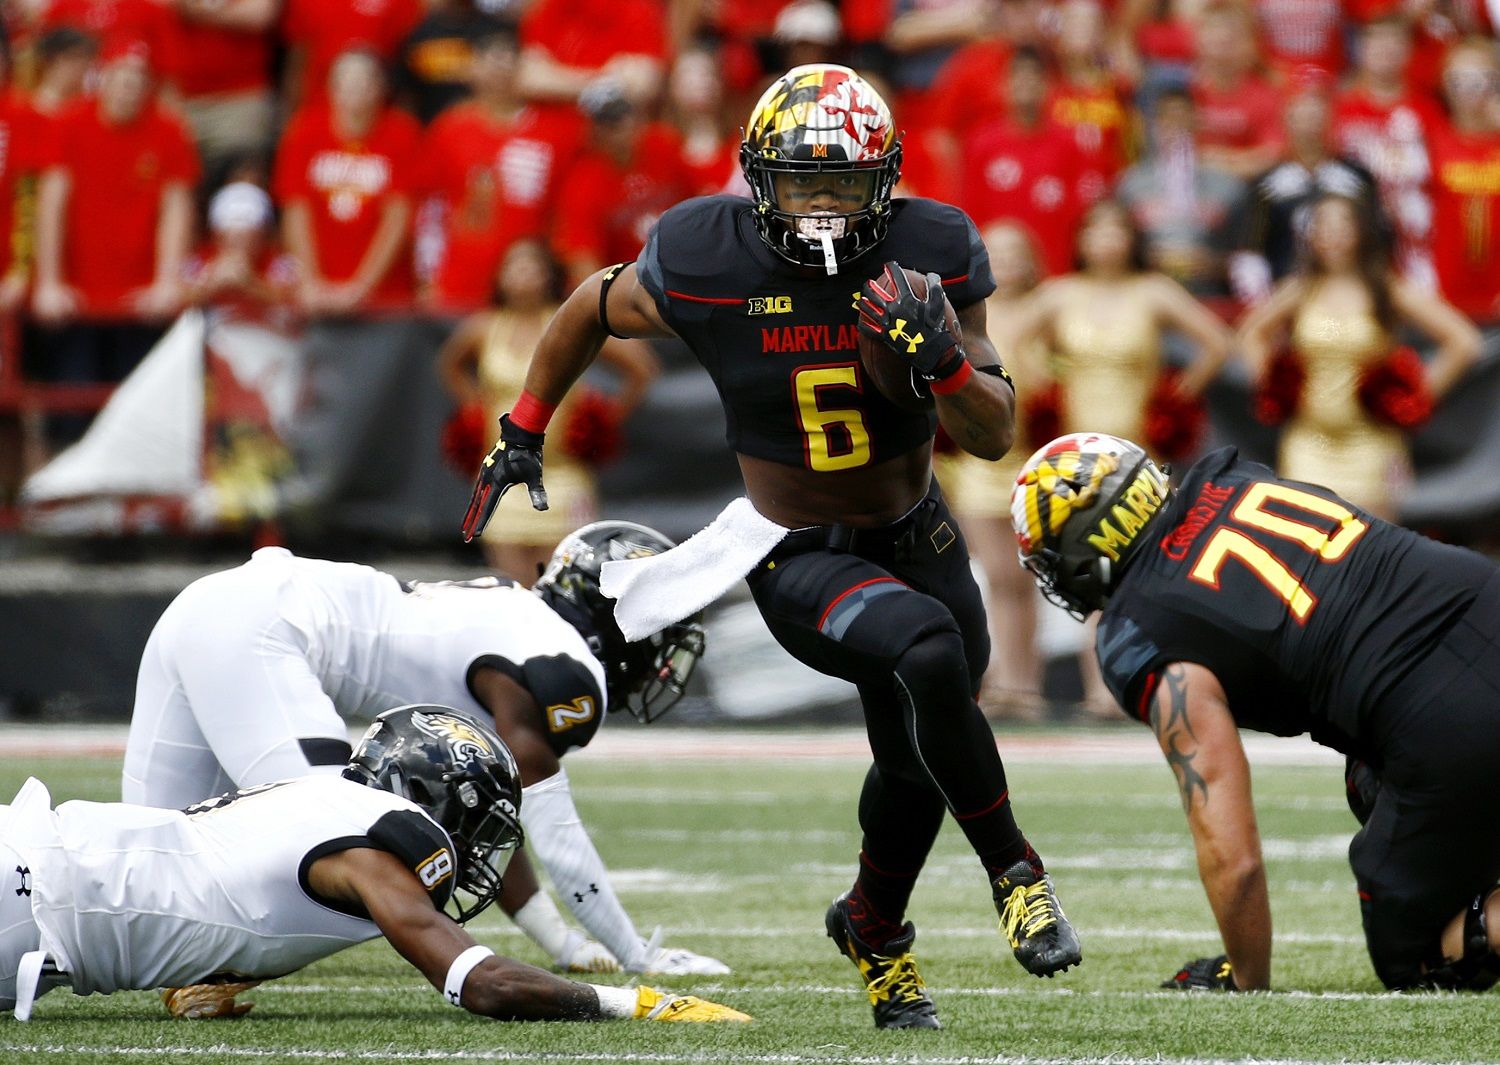 FILE - In this Sept. 9, 2017, file photo, Maryland running back Ty Johnson (6) rushes for a touchdown in the first half of an NCAA college football game against Towson in College Park, Md. One of the big early-season surprises so far has been Maryland’s ability to run. Through three weeks, the Terrapins are No. 3 in the Big Ten at 224 yards per game. With their top two quarterbacks out for the season, it’s a pretty good bet they’ll run even more this week. The problem in this week's game: Minnesota has the league’s best rushing defense. (AP Photo/Patrick Semansky, File)